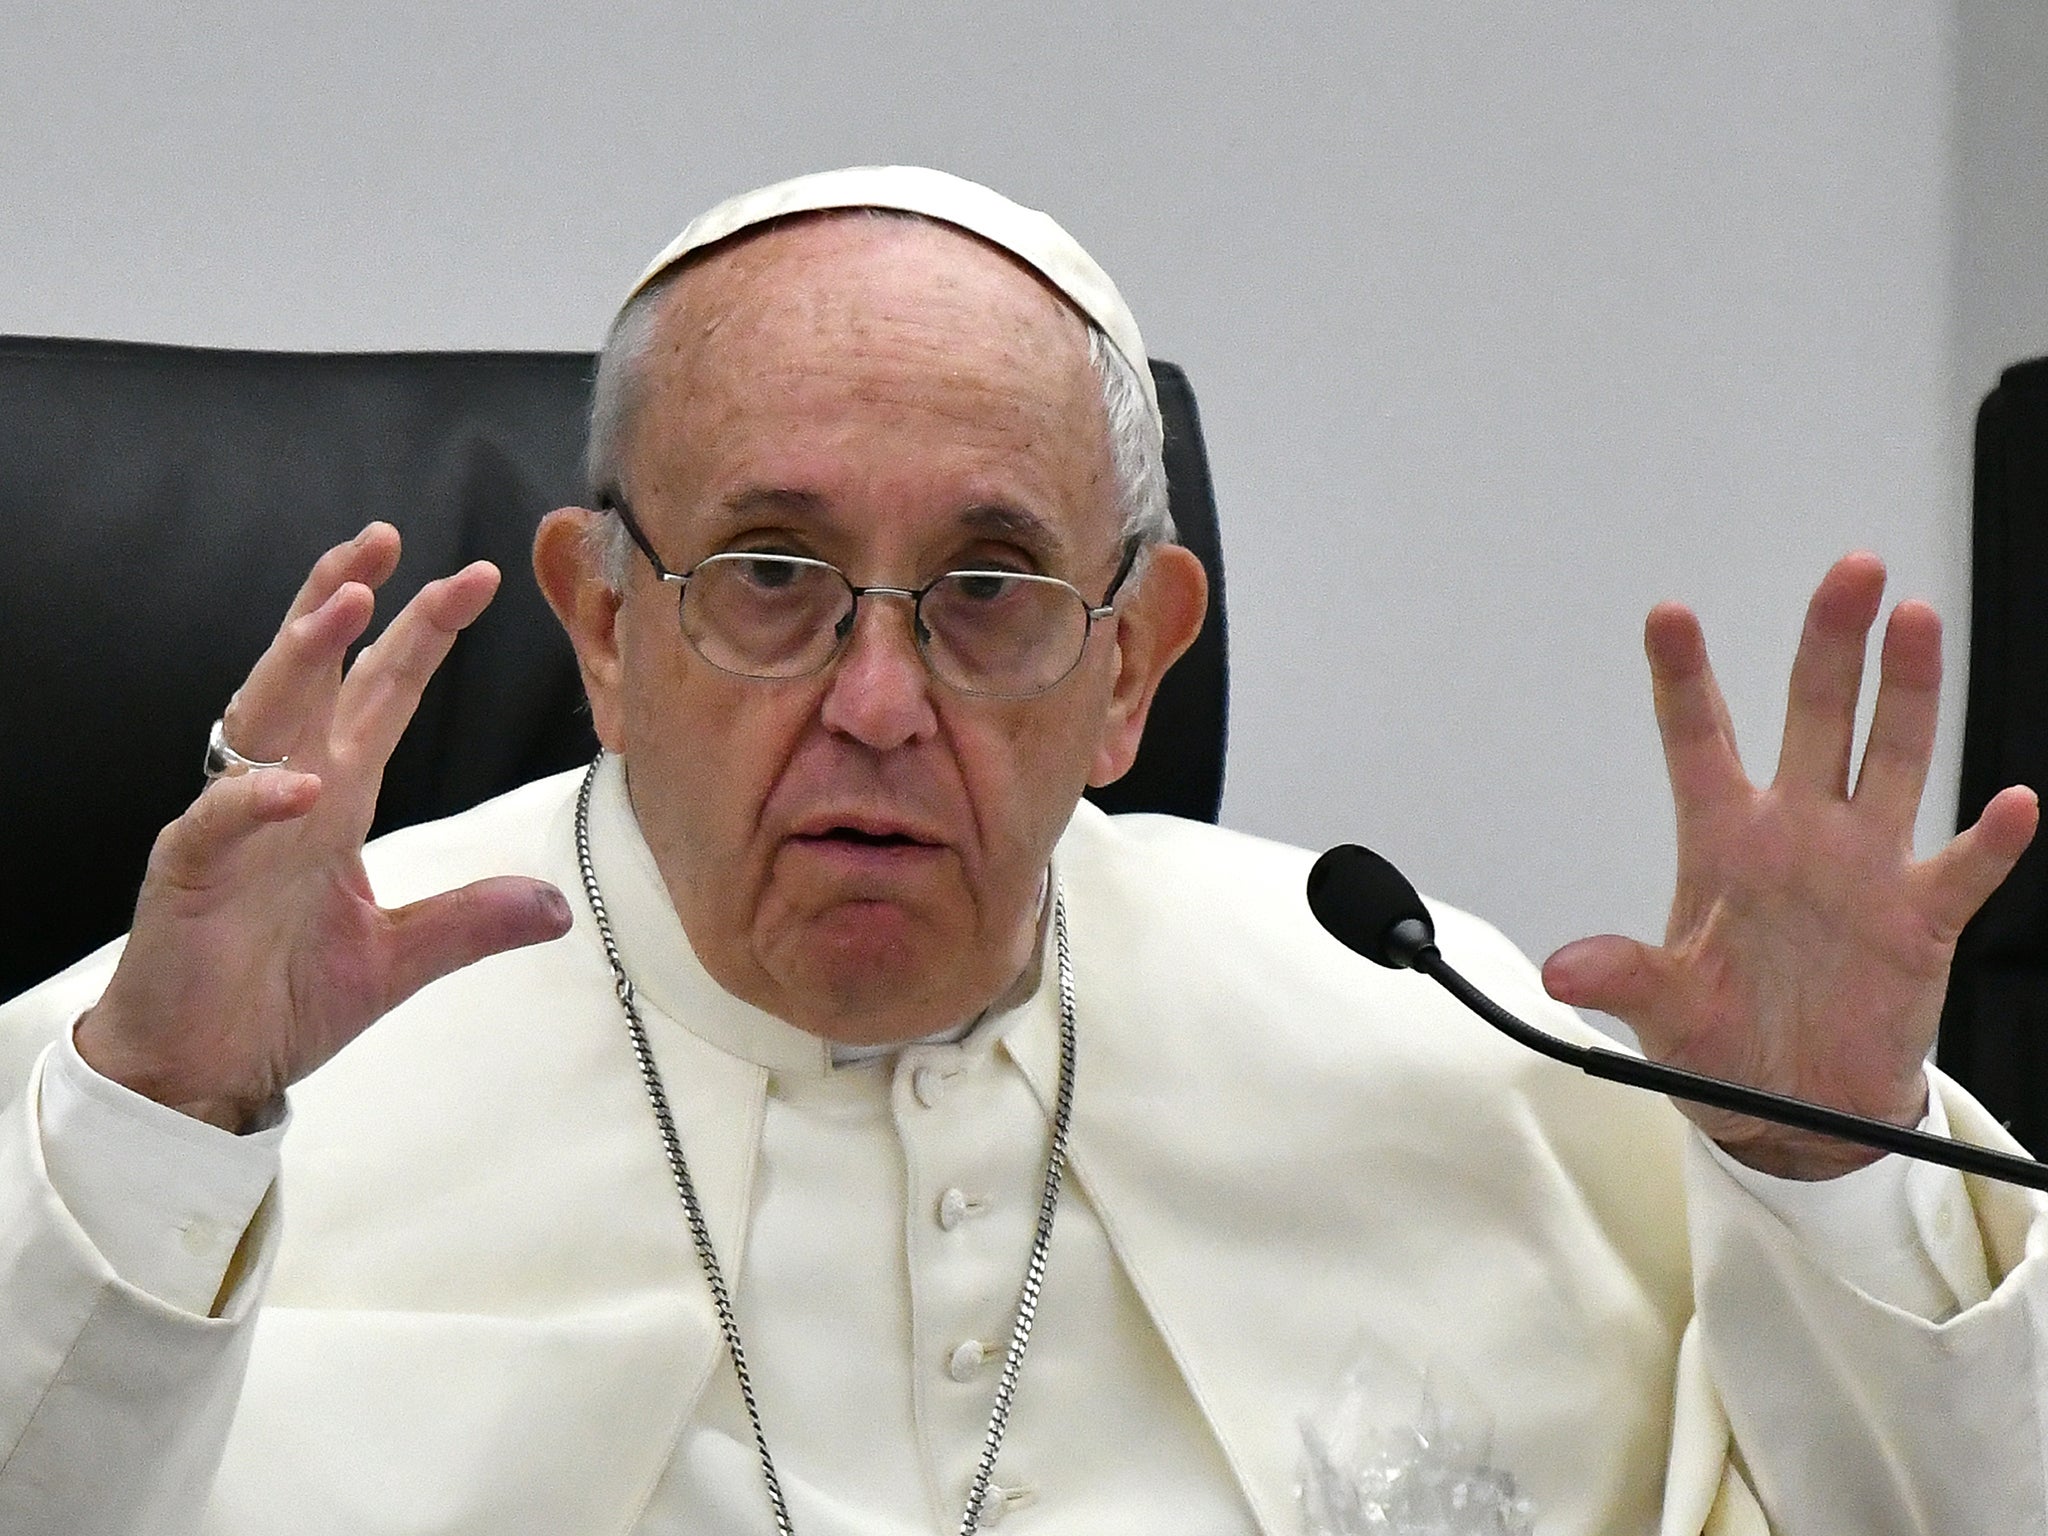 Pontiff describes men who frequent prostitutes as criminals with a 'sick mentality' who think women exist to be exploited